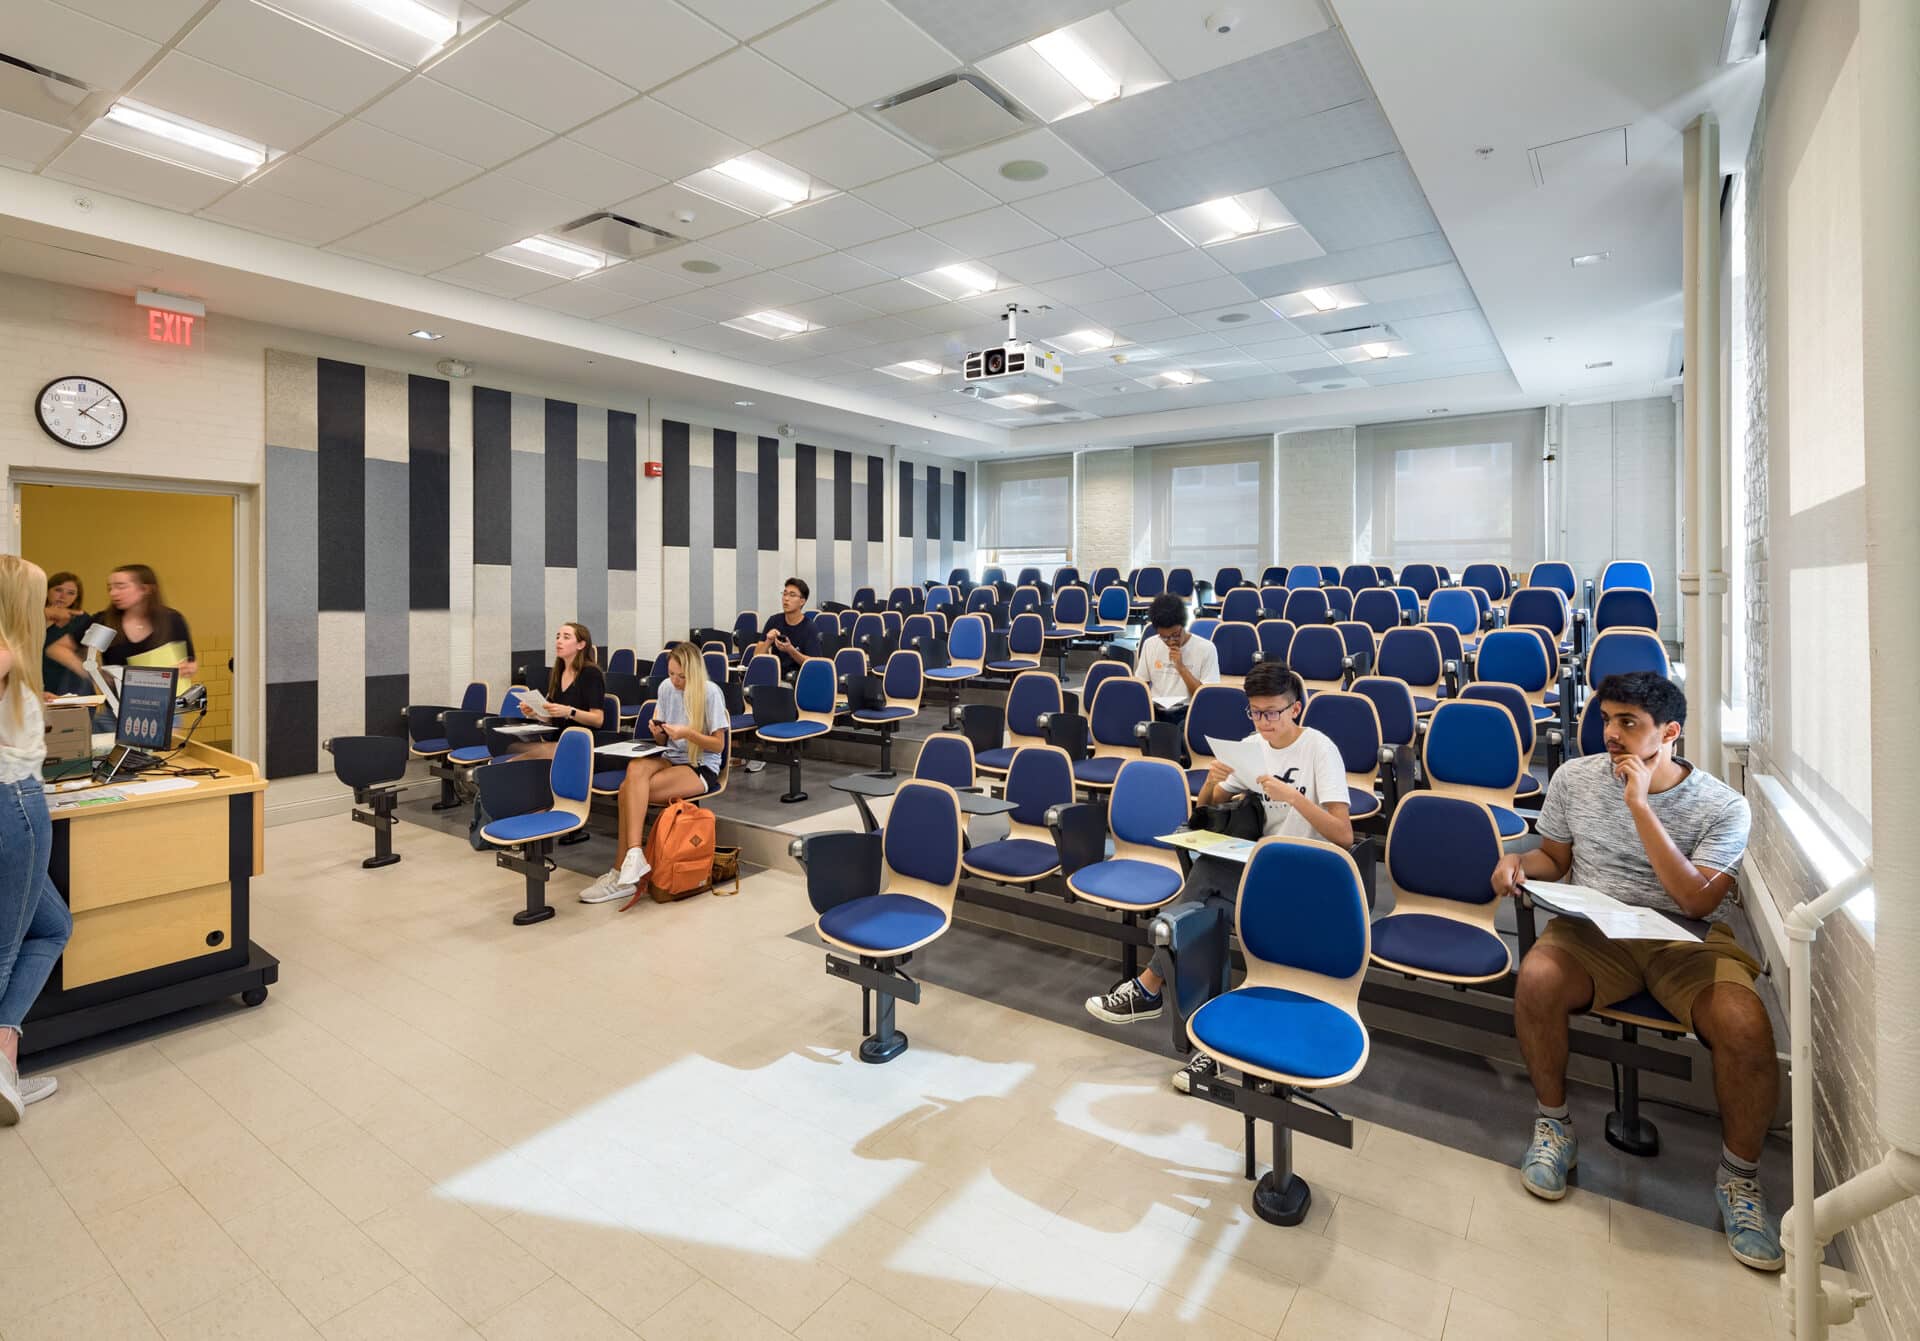 university of illinois noyes lab classroom designed by trivers architectural firm